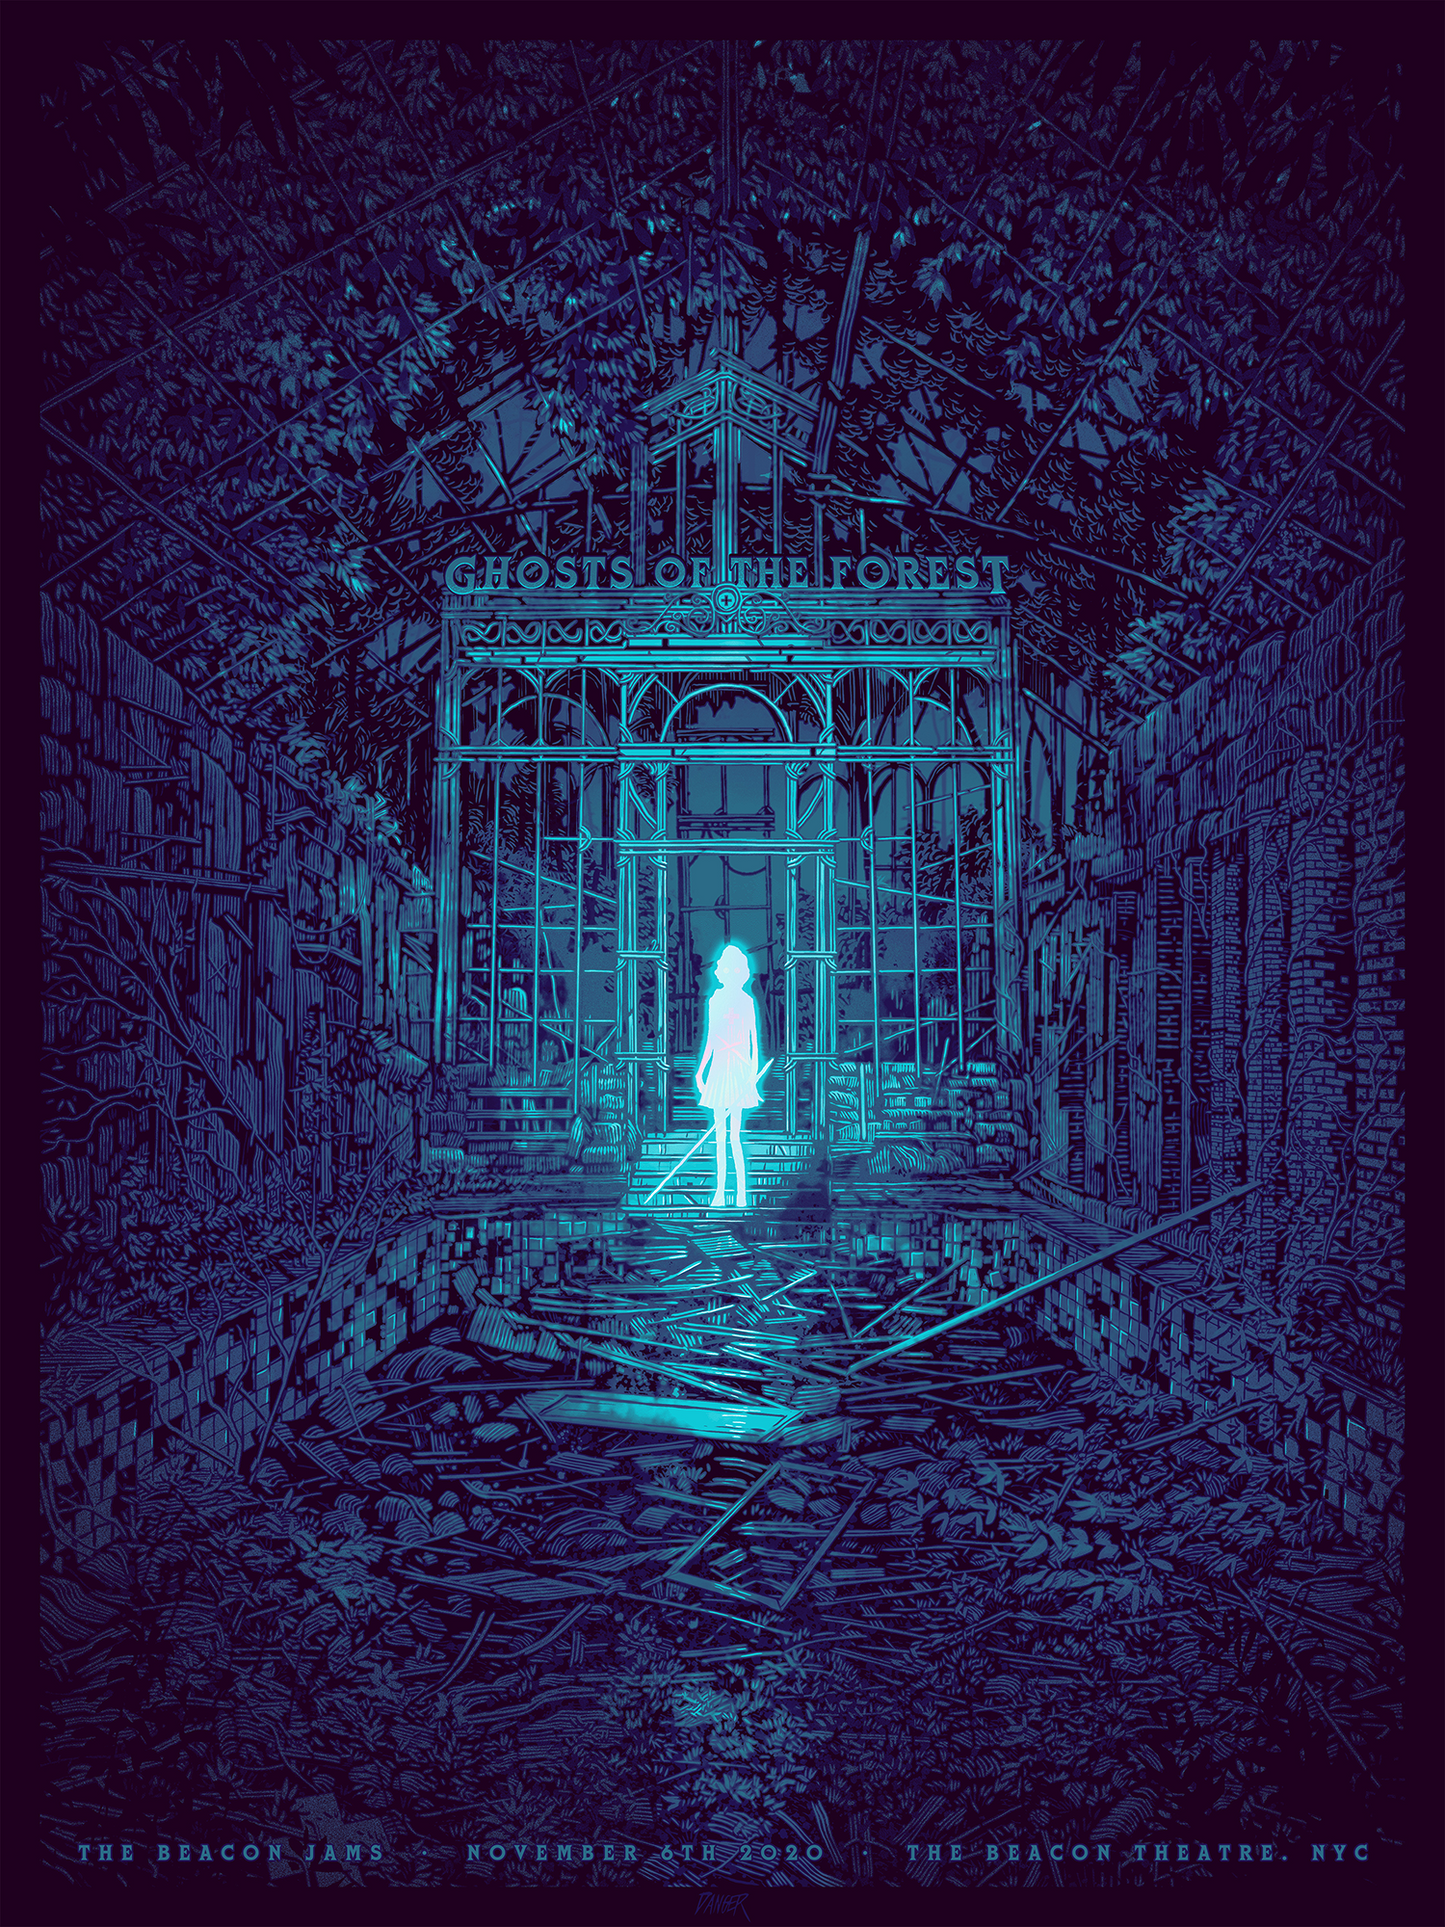 Daniel Danger "The Beacon Jams: Ghosts of the Forest" Variant